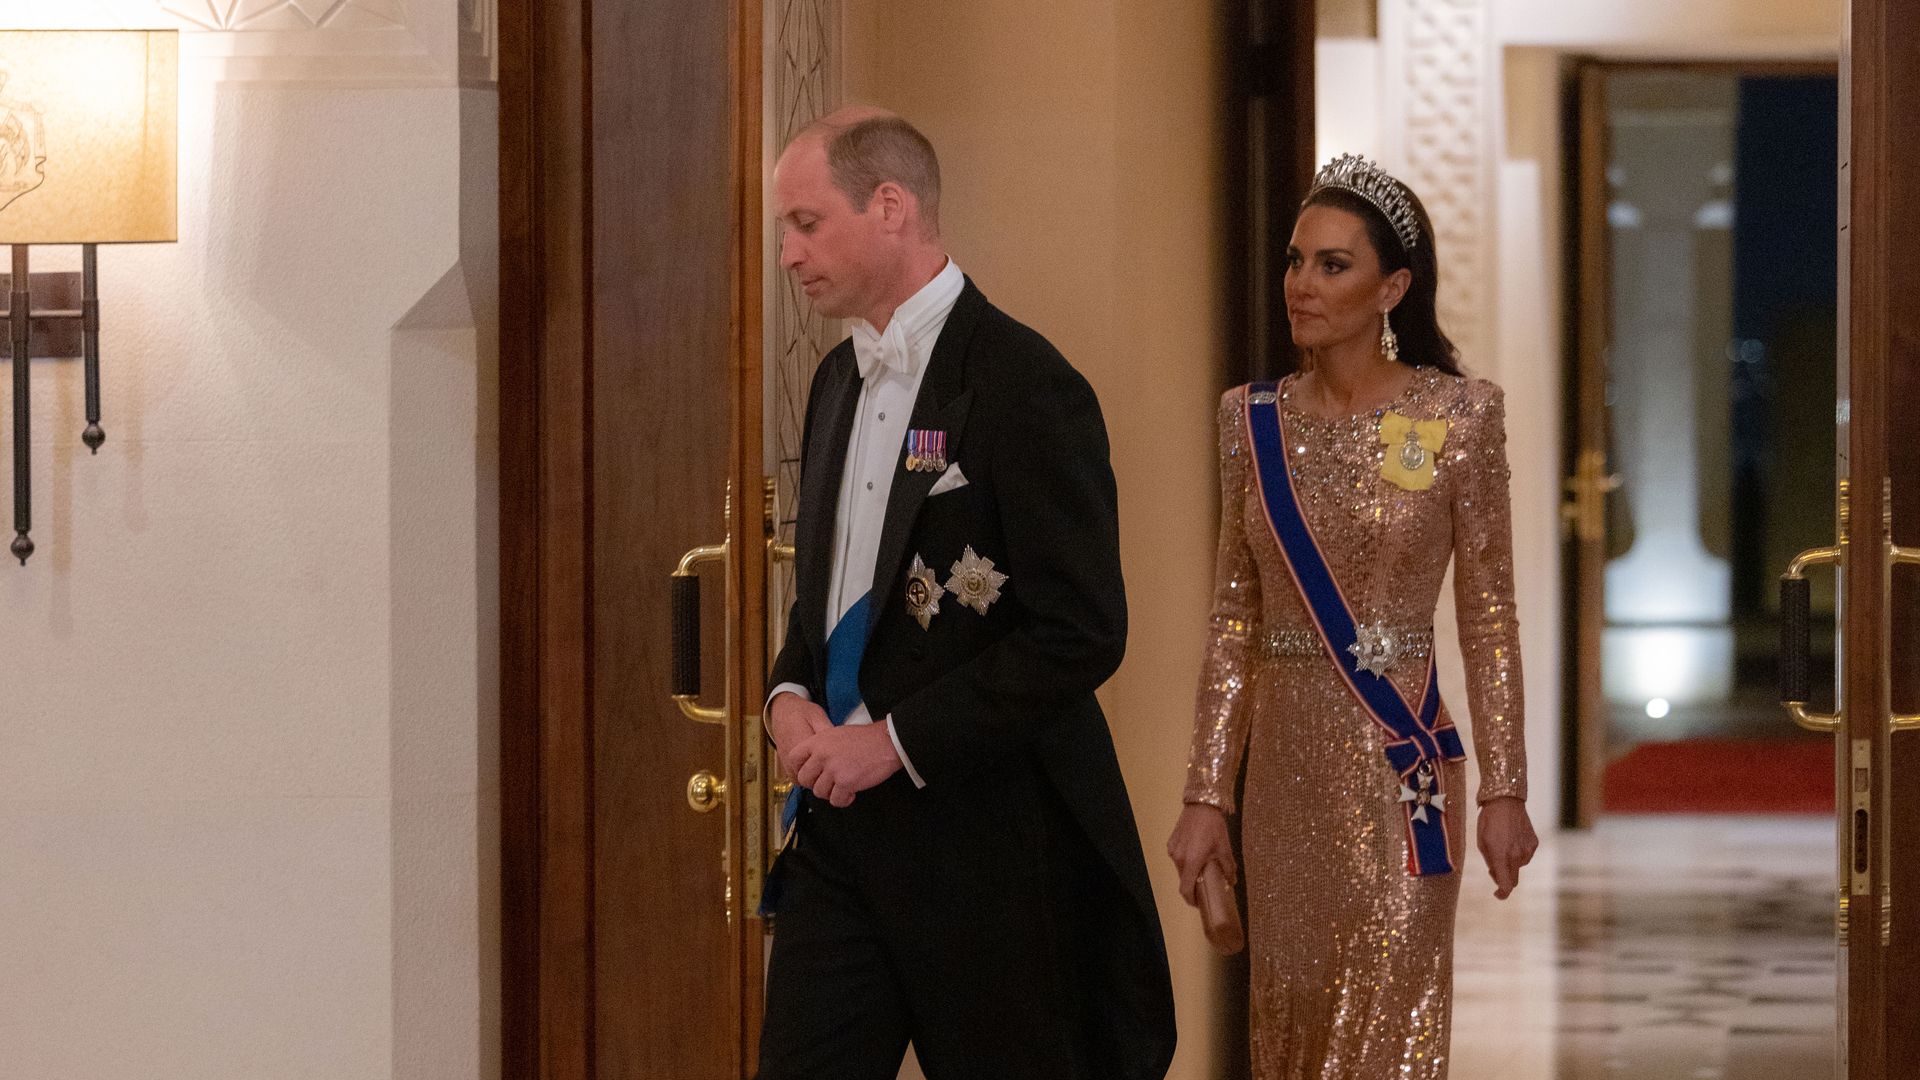 The Prince and Princess of Wales arriving at a state banquet